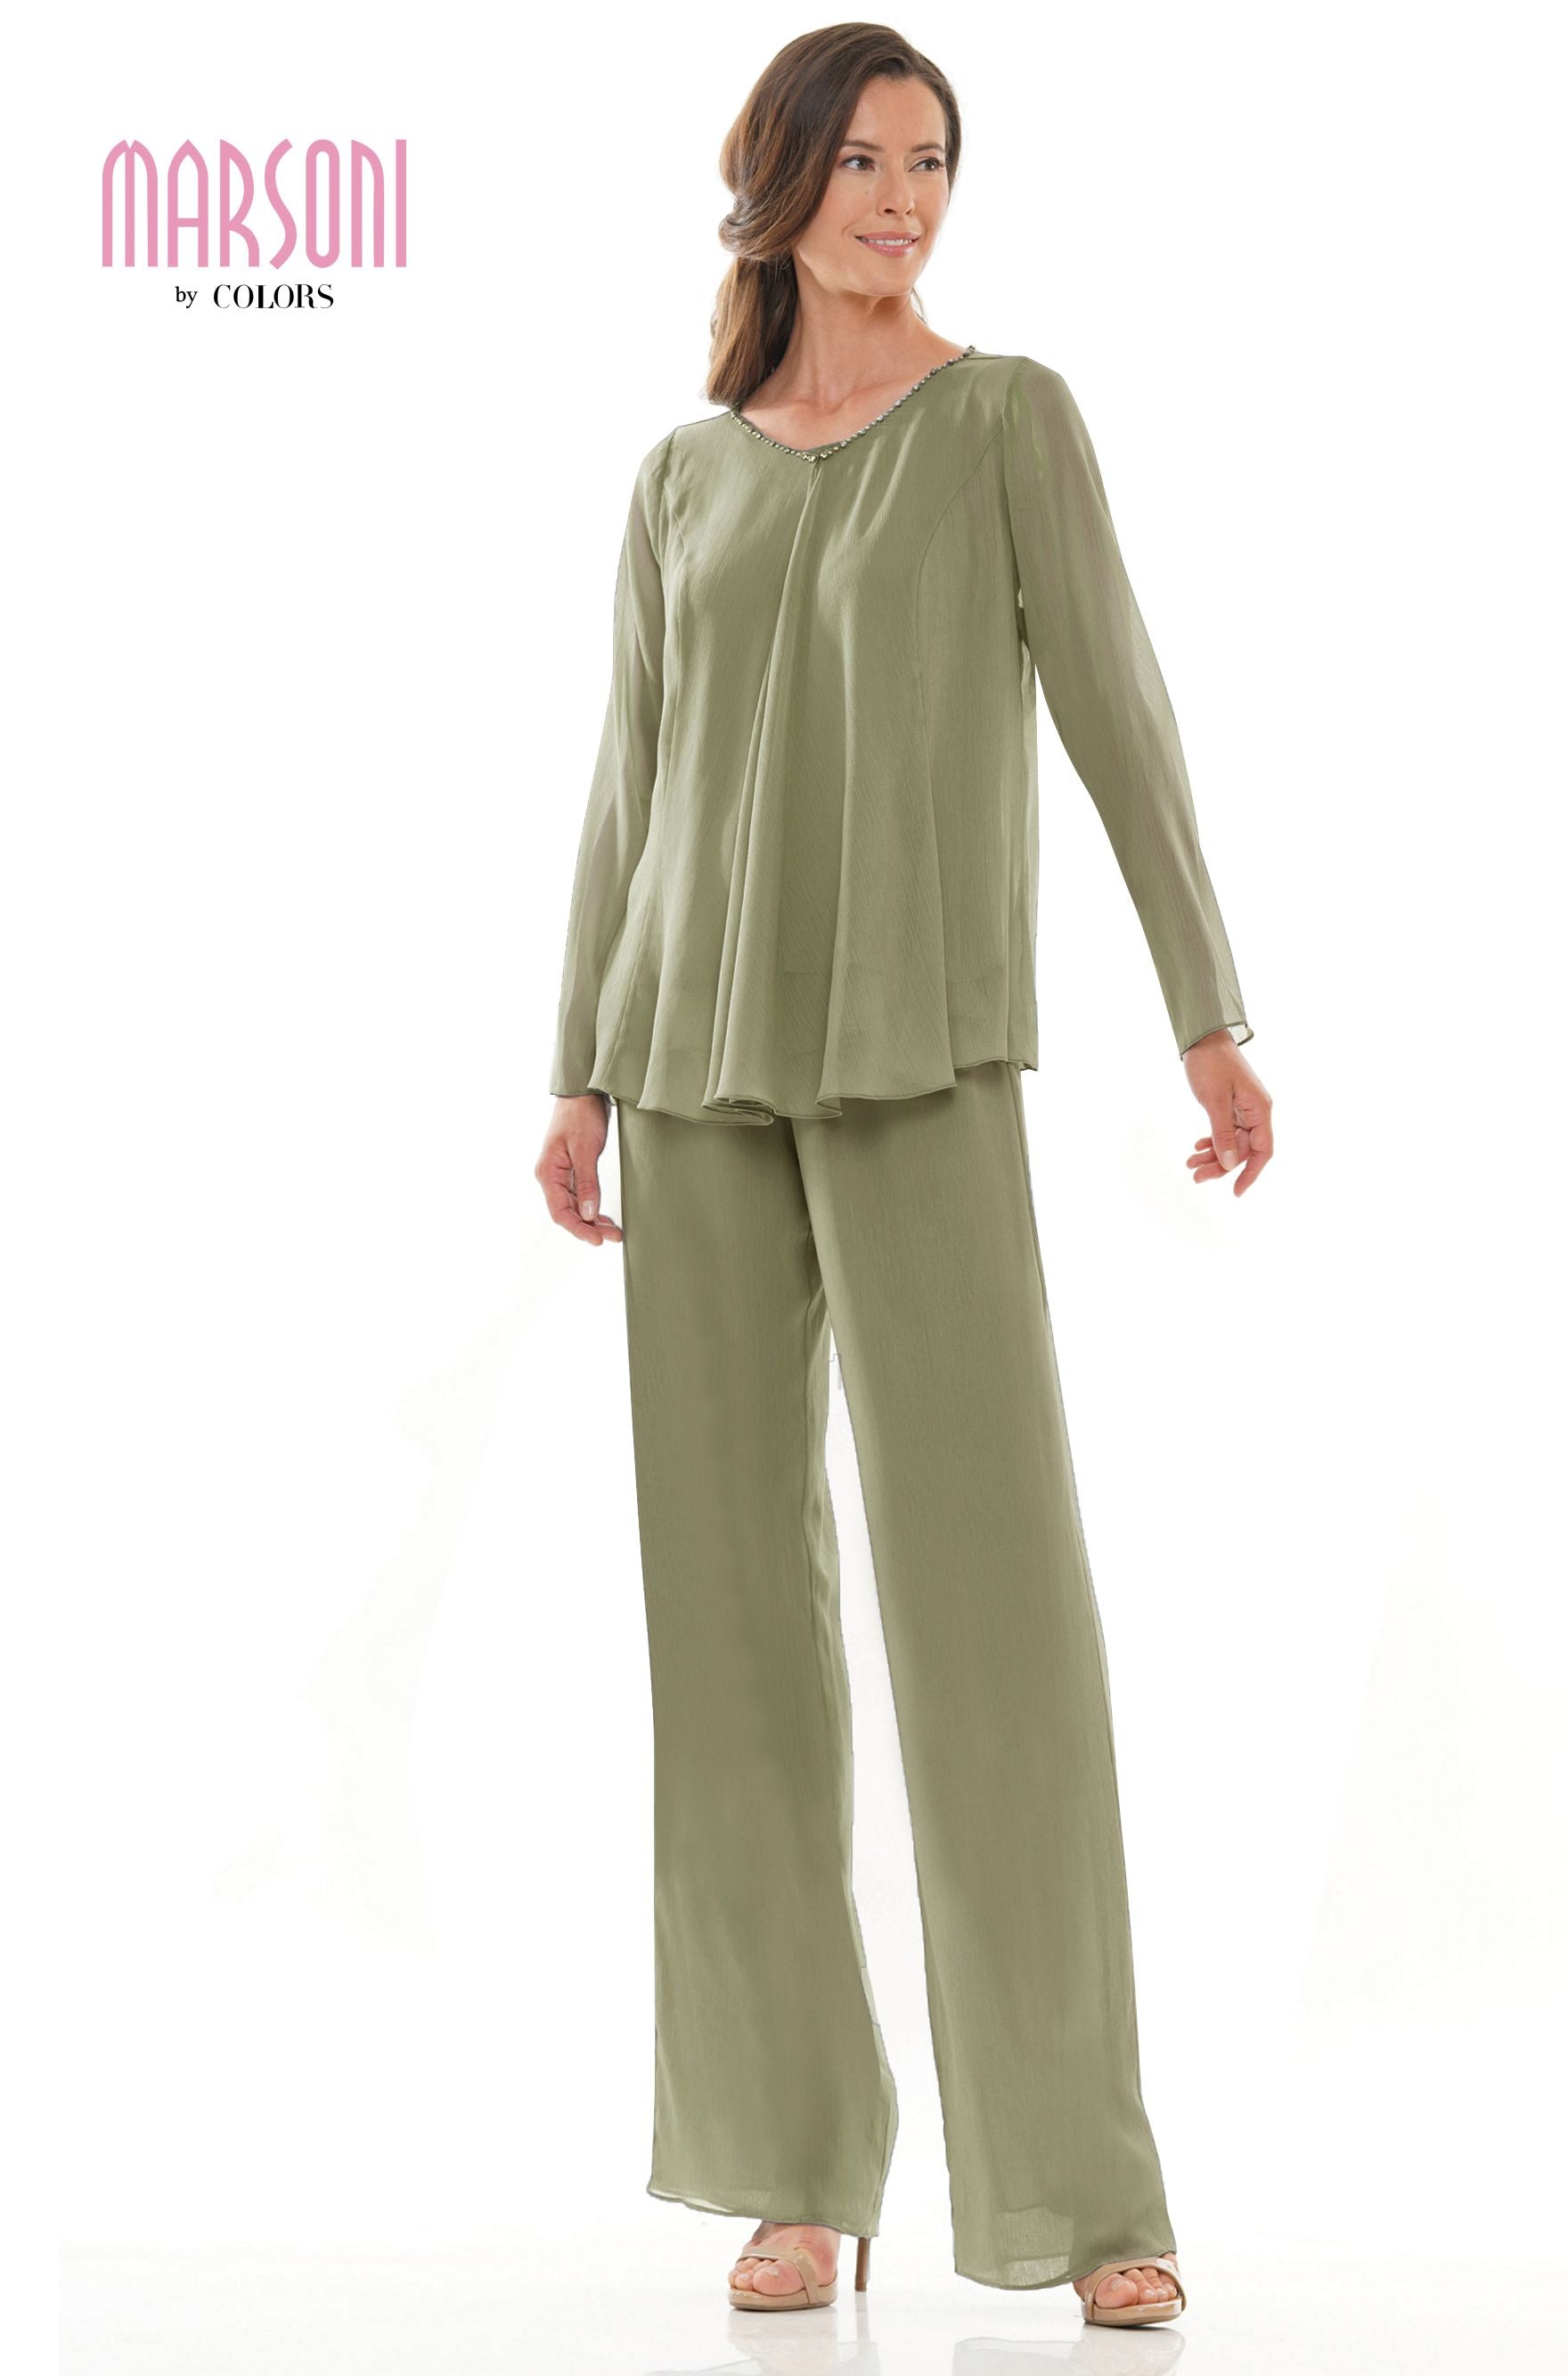 Clearance Sale Marsoni by Colors -M304 Pantsuit With Camisol